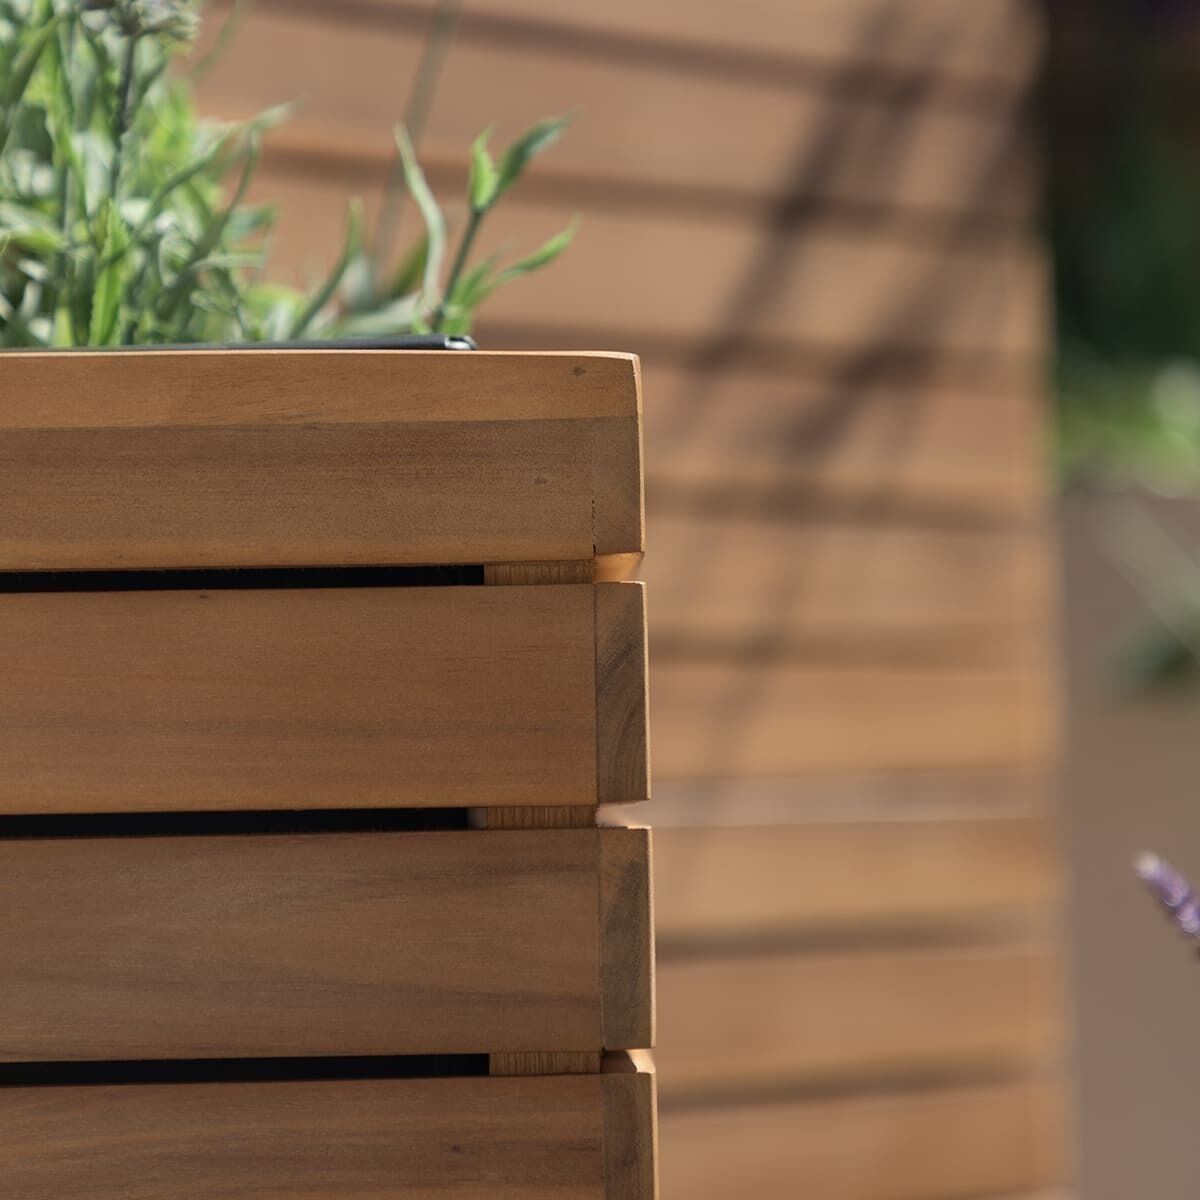 Maze - Bali Small Planter with Metal Liner - Acacia Wood product image